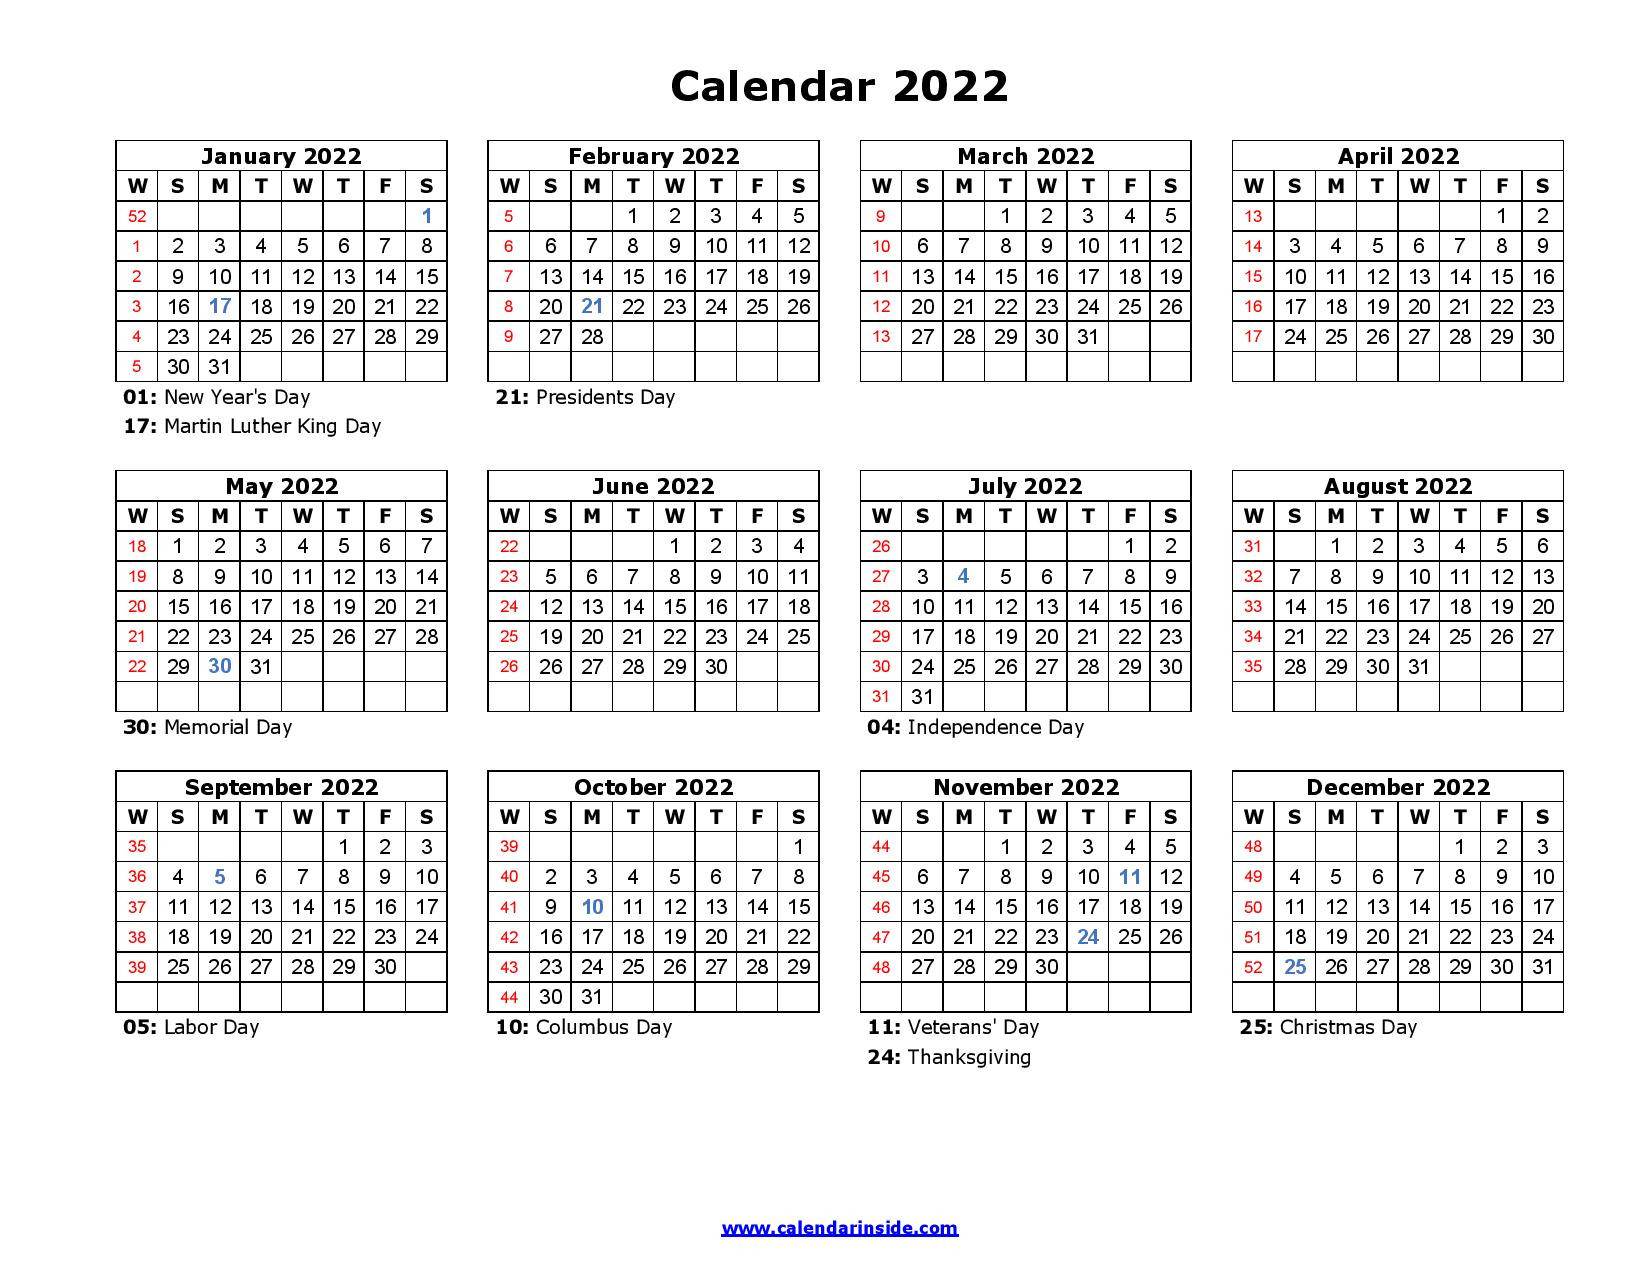 Free Printable Calendar 2022 Templates - Yearly Calendars  Free Printable Calendar 2022 And 2022 With Holidays